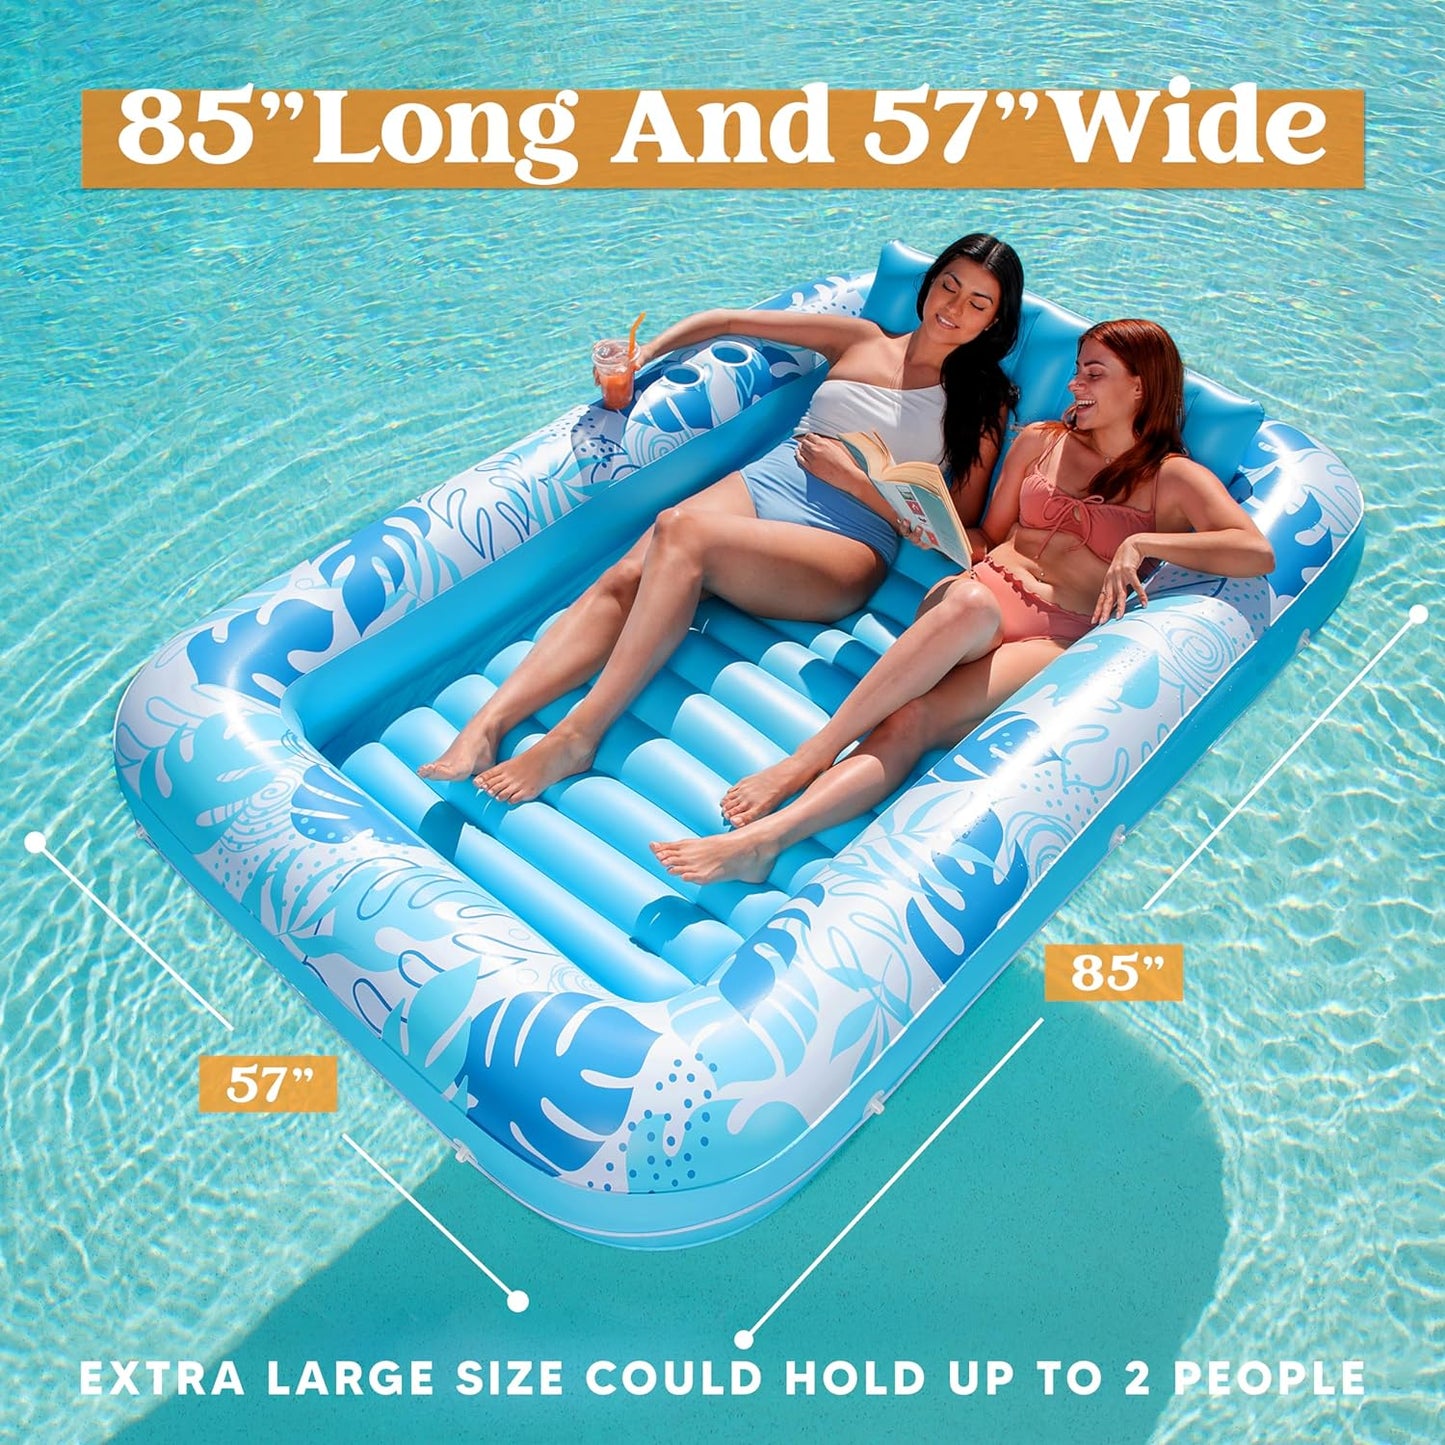 XL Inflatable Tanning Pool Lounger Float for Adults, 85" X 57" Extra Large Suntan Tub Pool Floats Sun Tan Tub Ice Bath Tub Tanning Bed Blow up Pool Raft Lounge Floatie